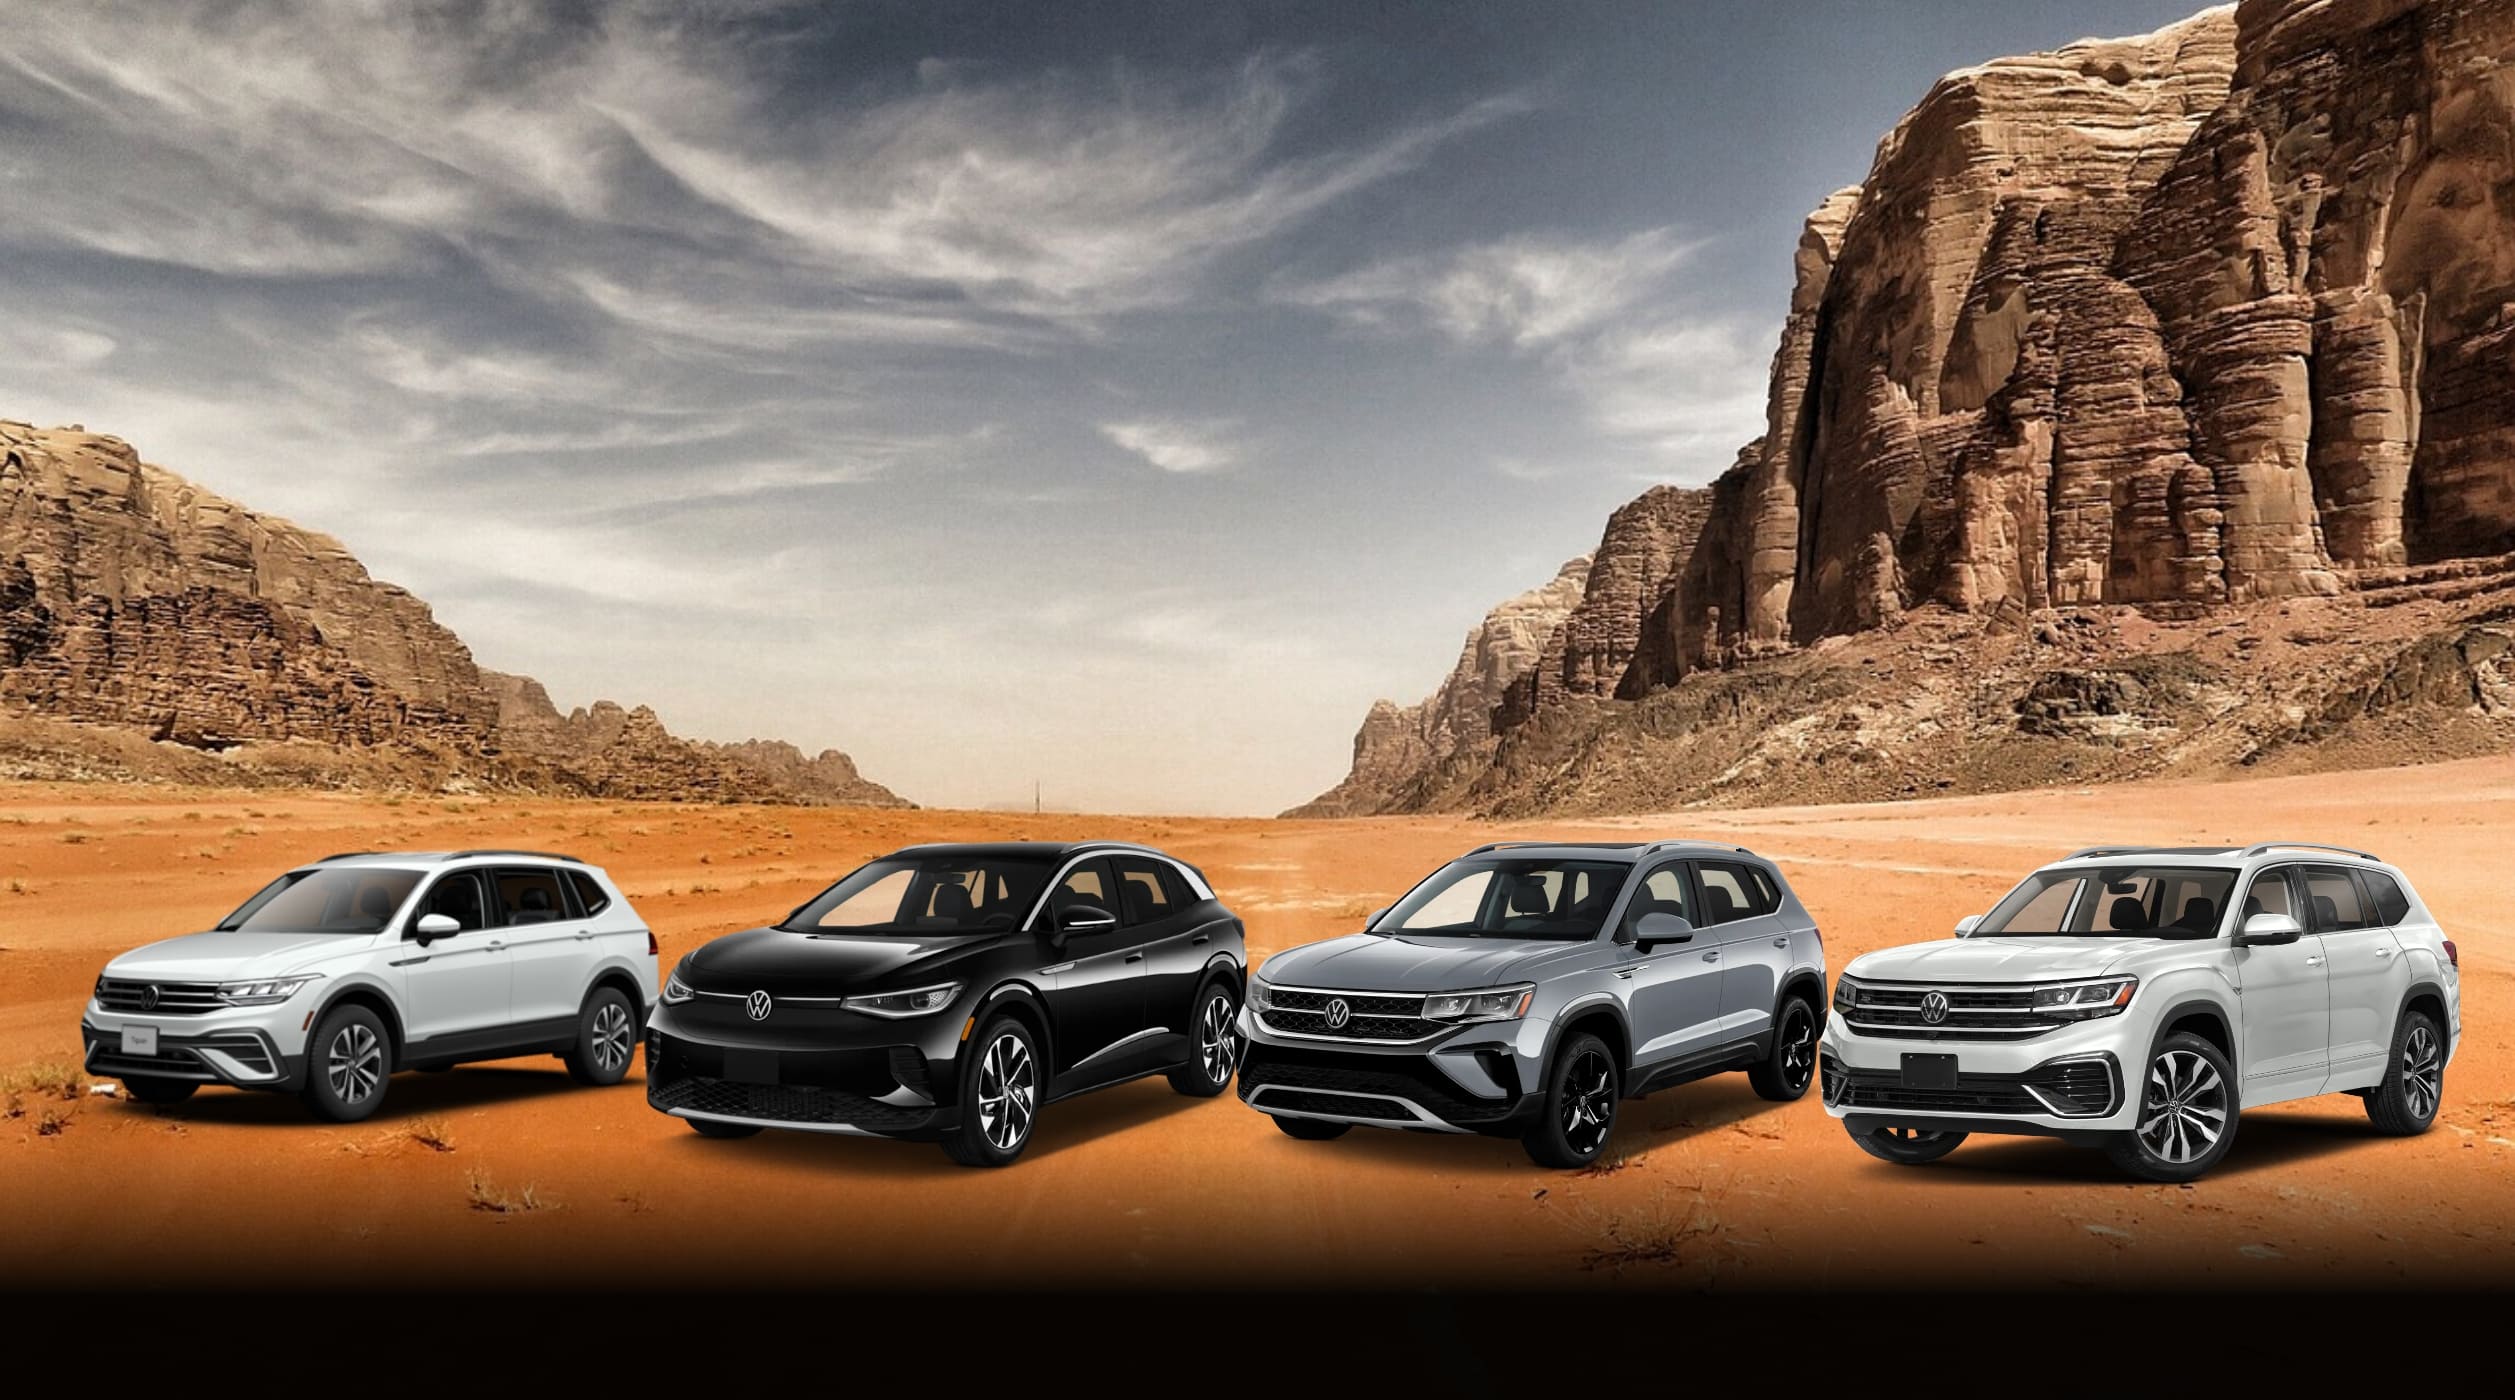 The all-new Volkswagen SUV range is their best yet. Whether you choose the Taos, Tiguan, Atlas, or ID4, you’ll be cruising the roads of Snellville, Georgia, and beyond in a stylish and beautifully crafted SUV.